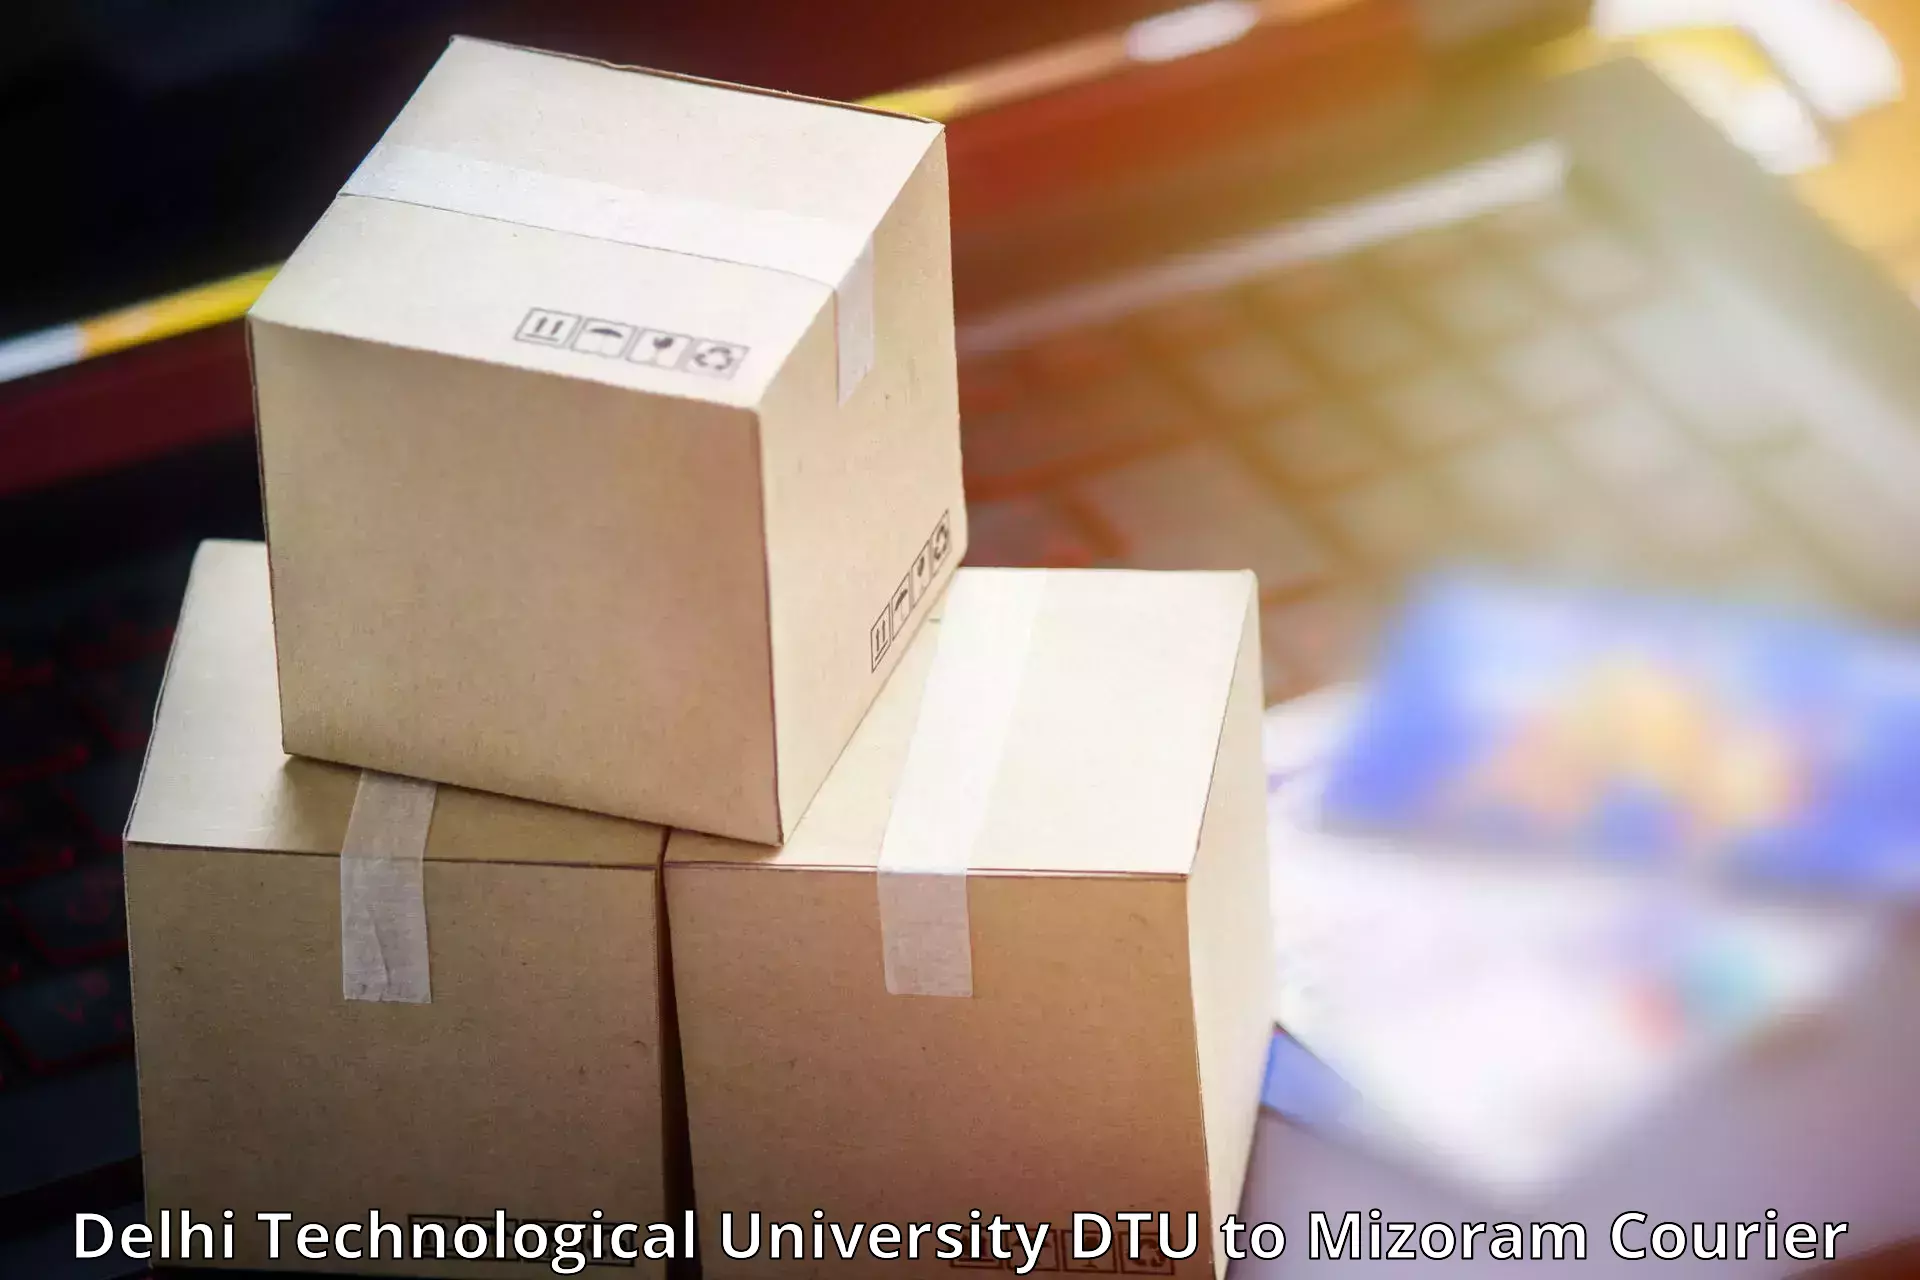 Tailored delivery services Delhi Technological University DTU to Mizoram